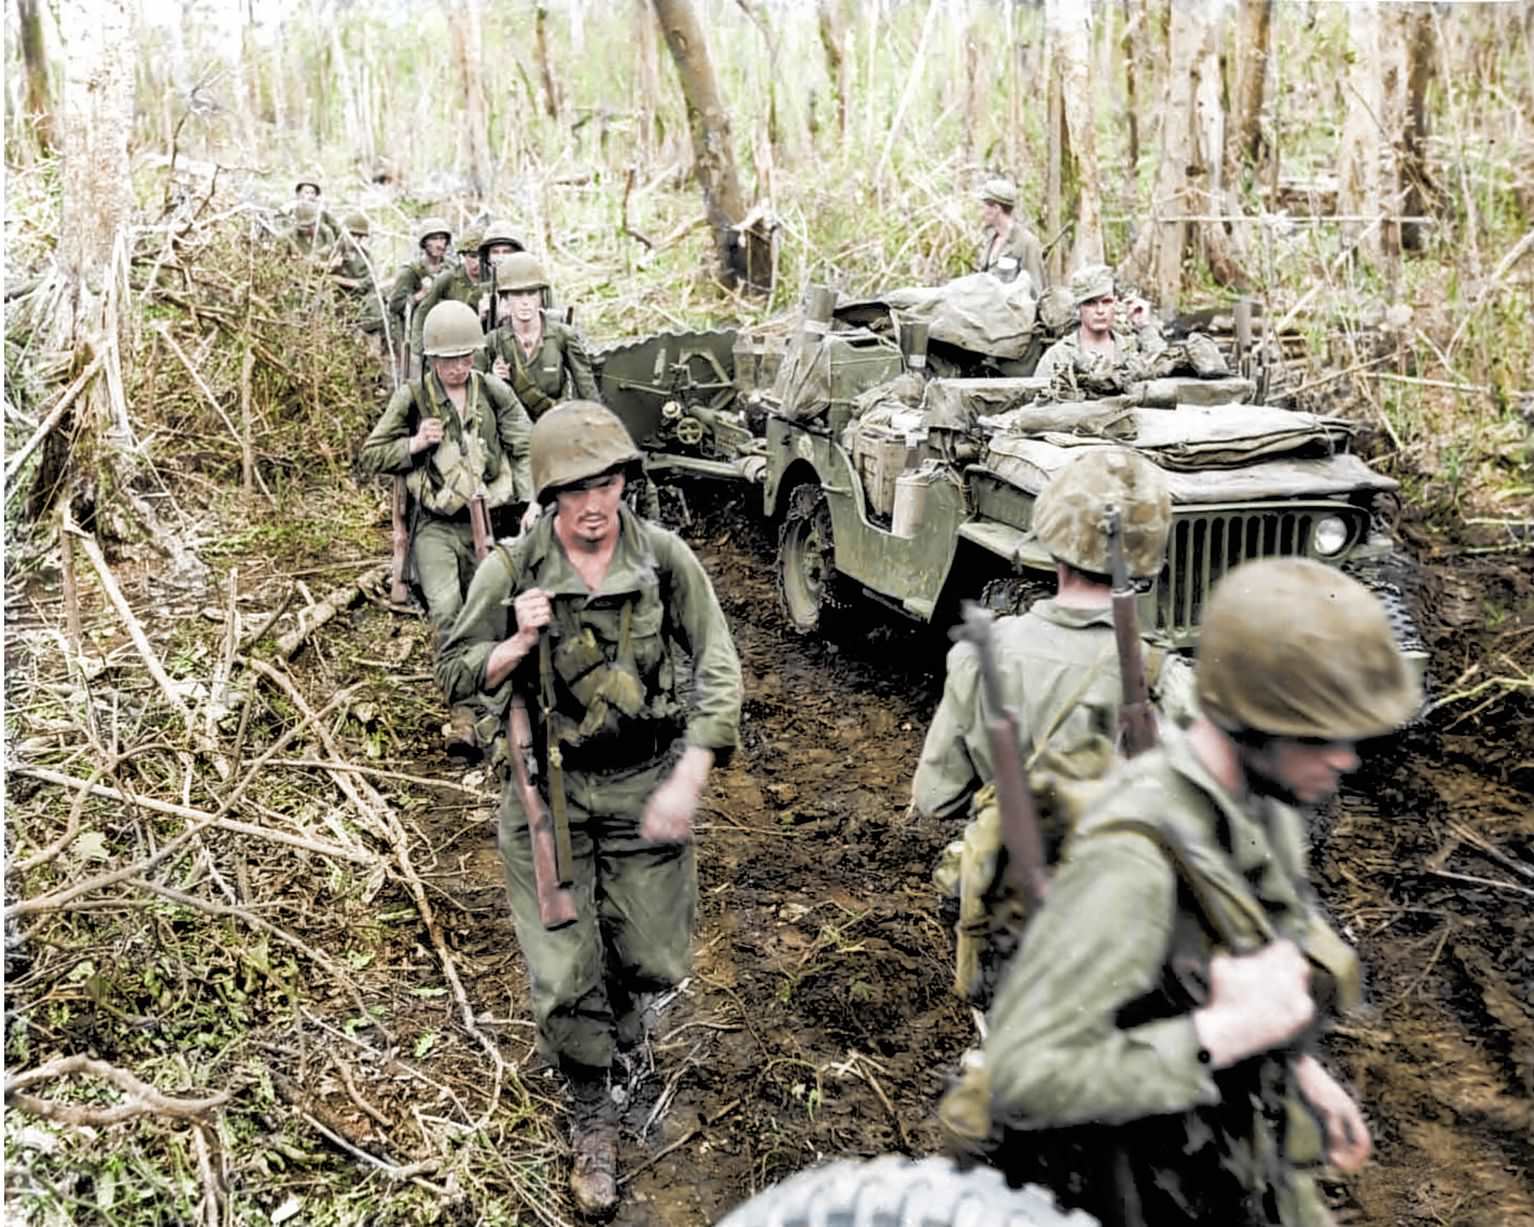 Men of the US First Marines Division at Cape Gloucester, New Britain, Bismarck Archipelago, late December 1943.